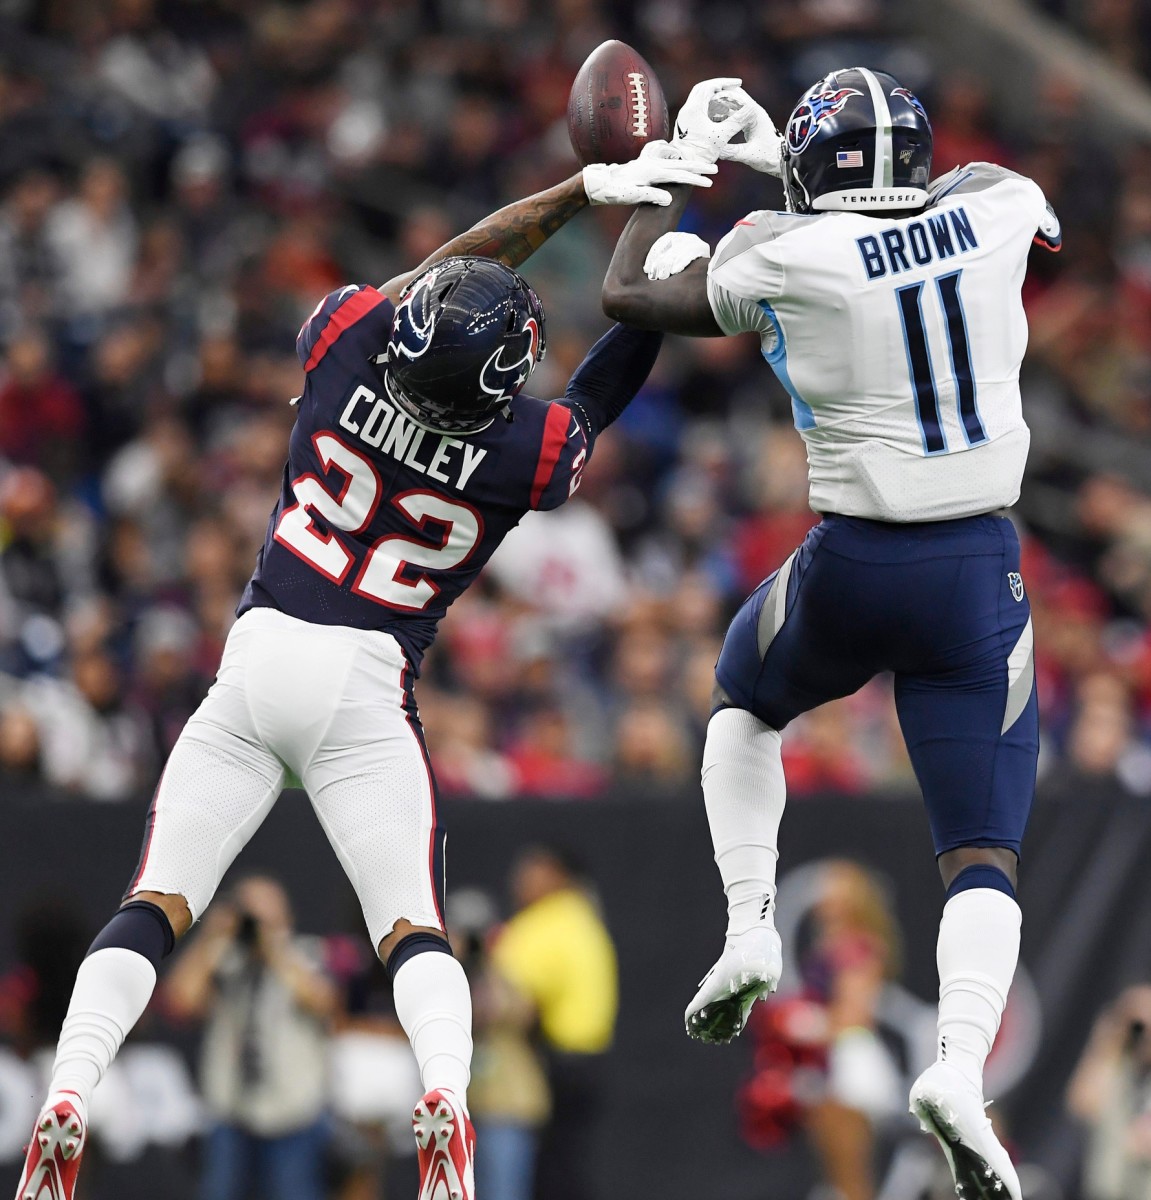 Houston Texans cornerback Gareon Conley (22) breaks up a pass intended for Titans receiver A.J. Brown (11) © George Walker IV / Tennessean.com, Nashville Tennessean via Imagn Content Services, LLC